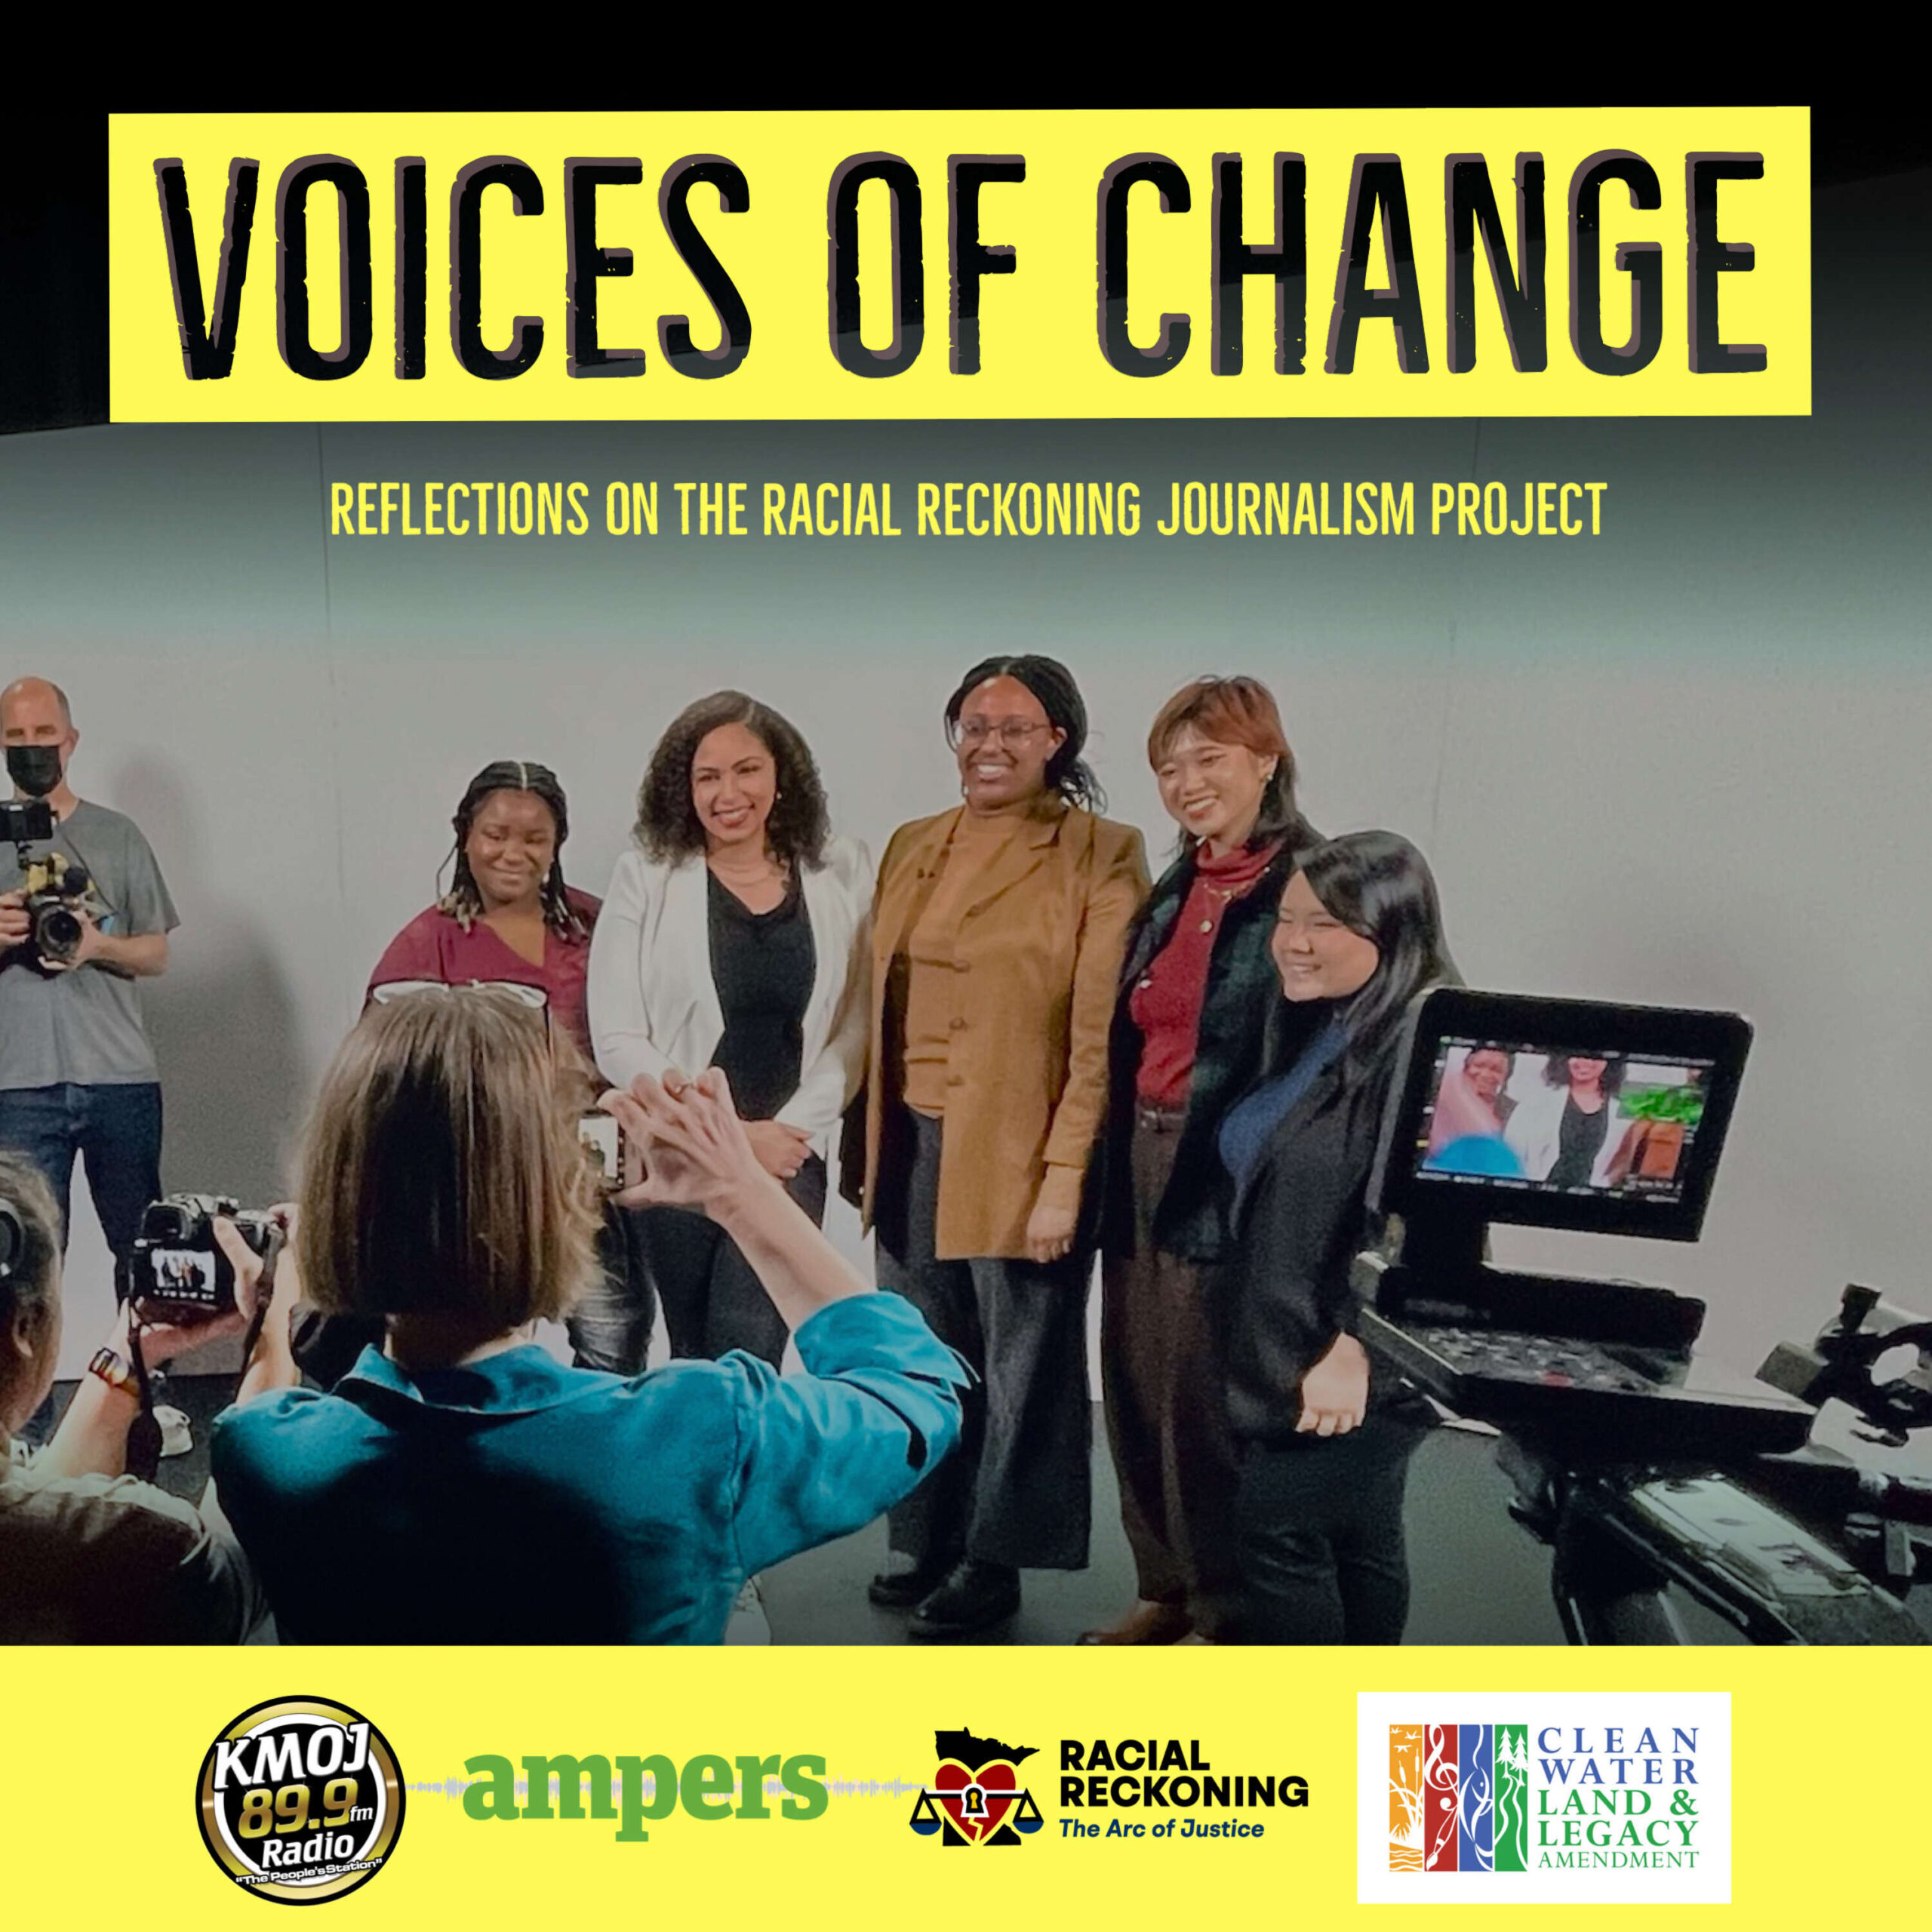 Voices of Change: Reflections on the Racial Reckoning Journalism Project